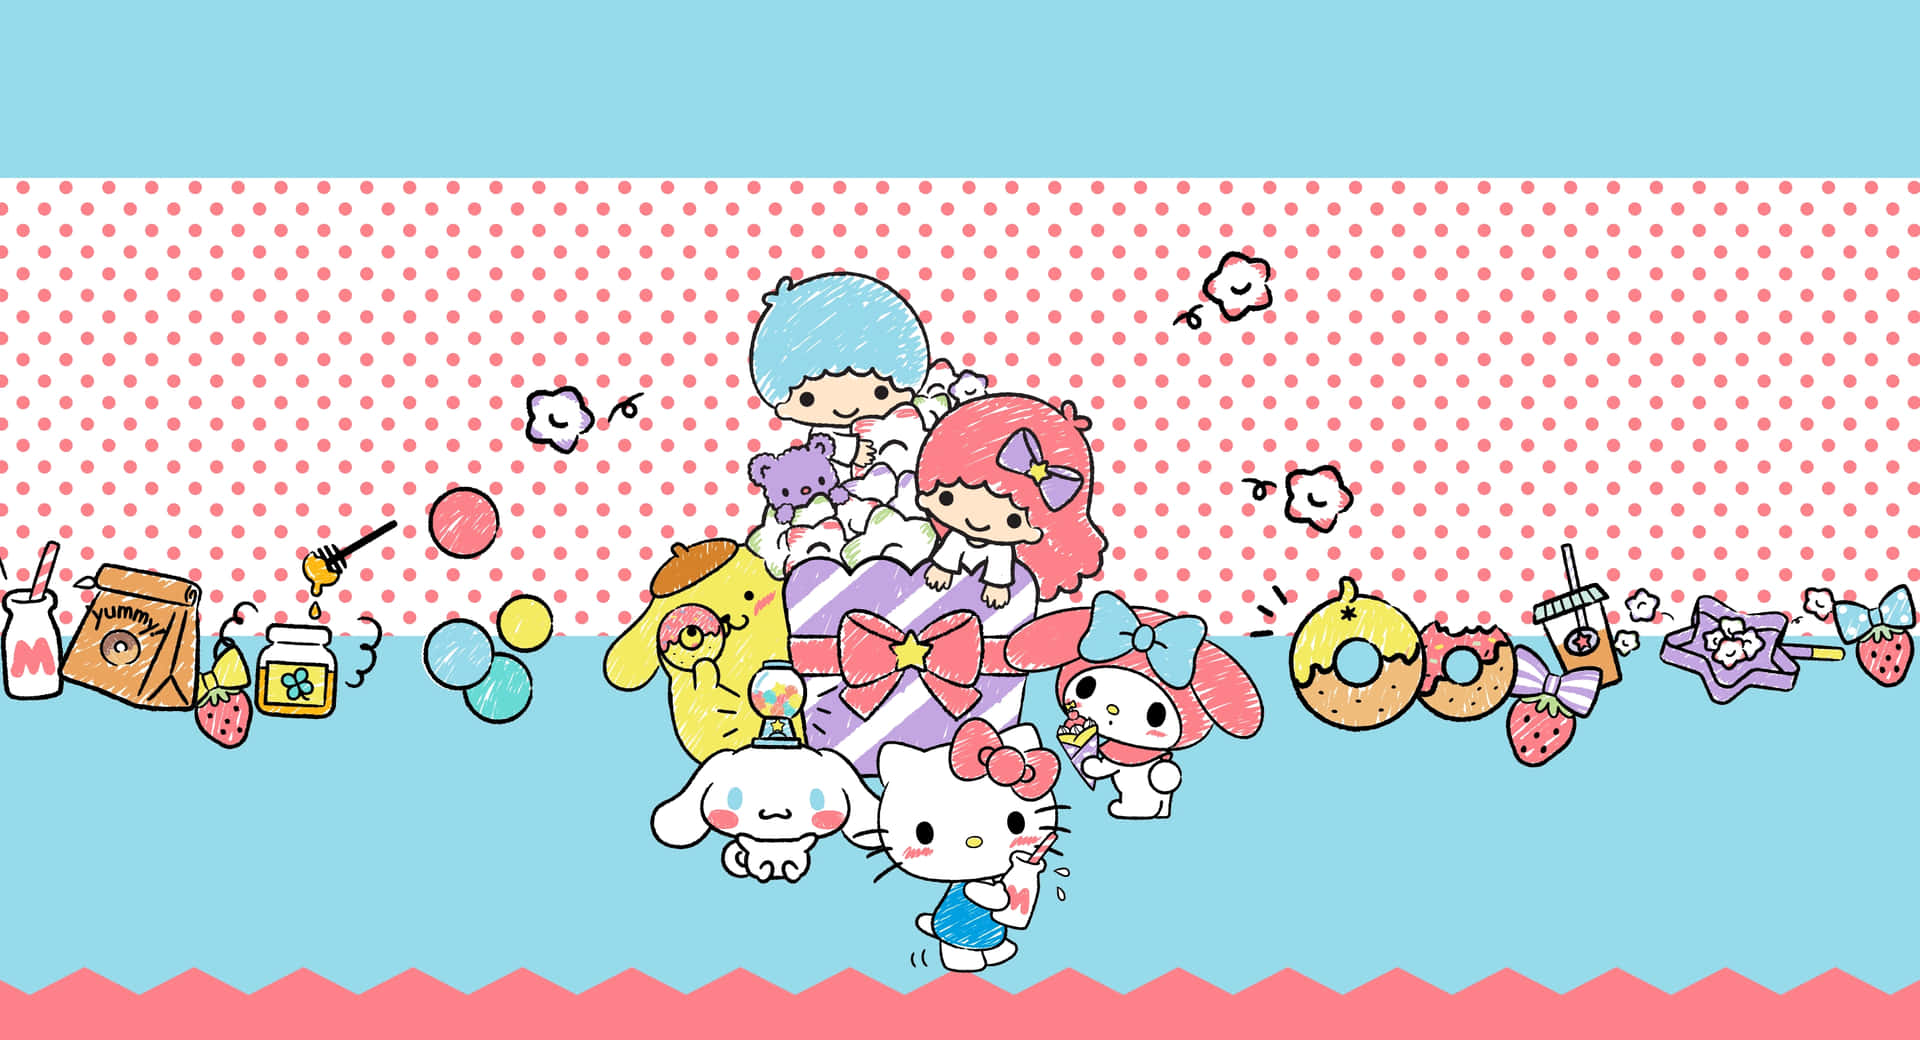 Download Hello Kitty and friends enjoying a sunny day at the park